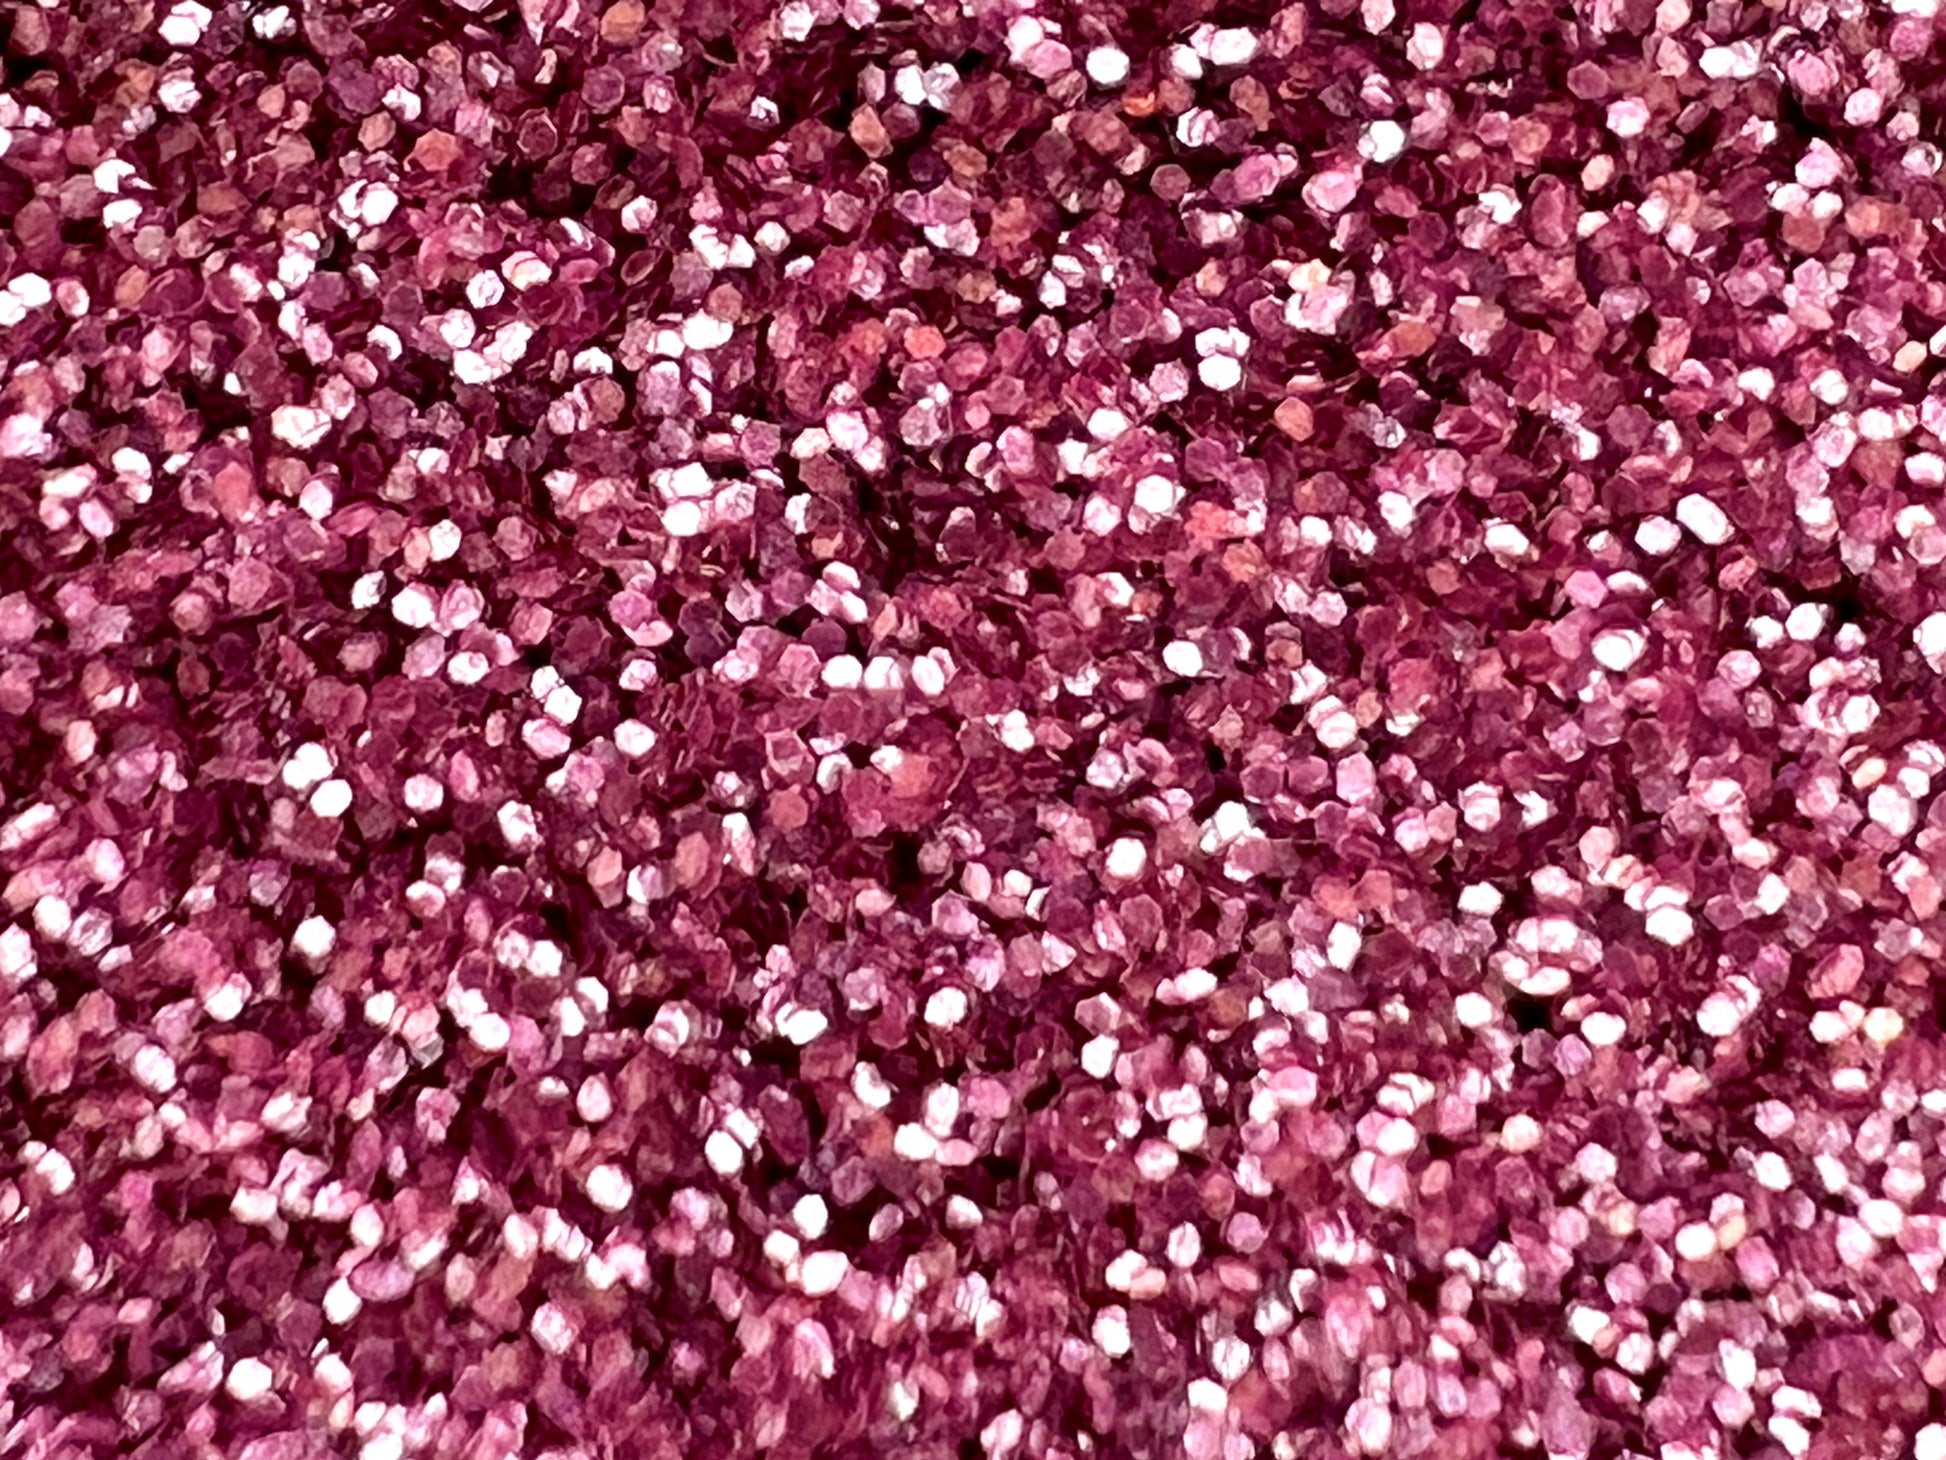 Orchid Club Ultra Fine Pearlized Pink Biodegradable Glitter